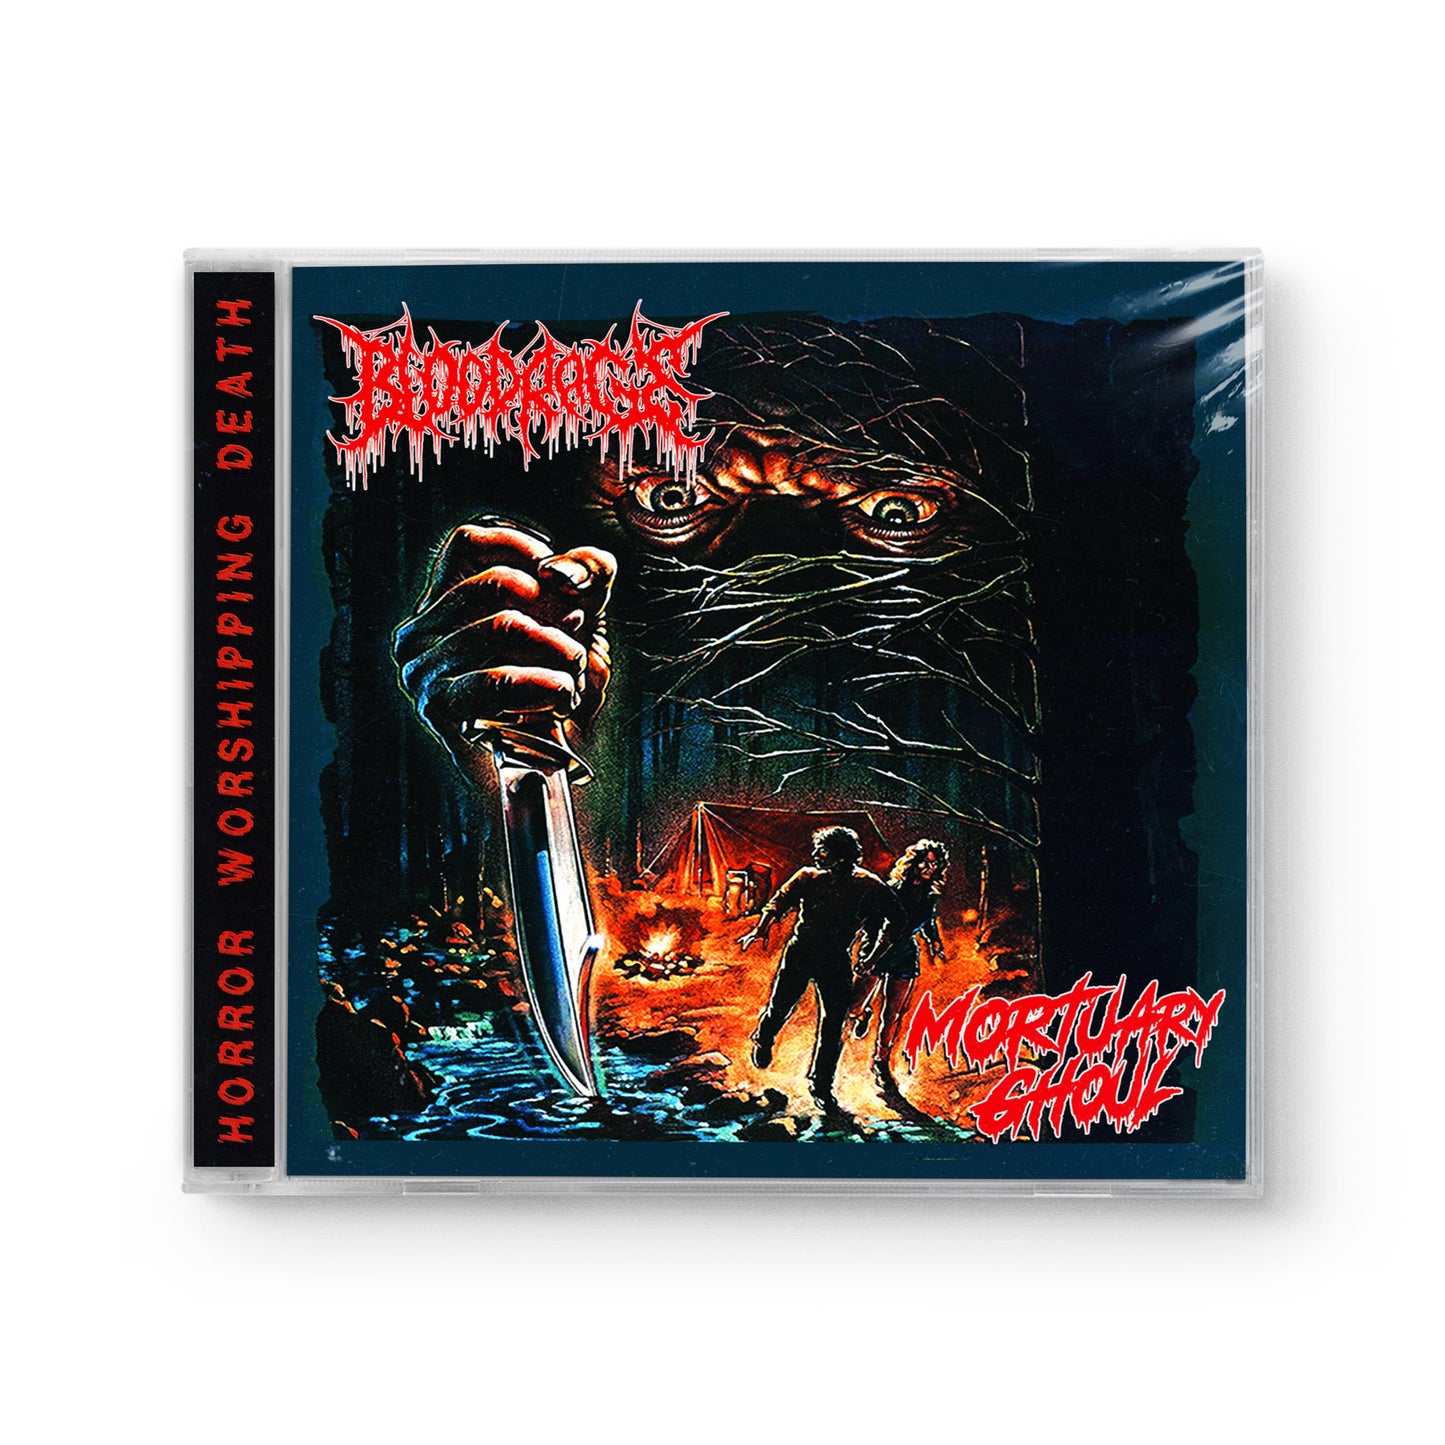 Blood Rage x Mortuary Ghoul "Horror Worshipping Death" CD